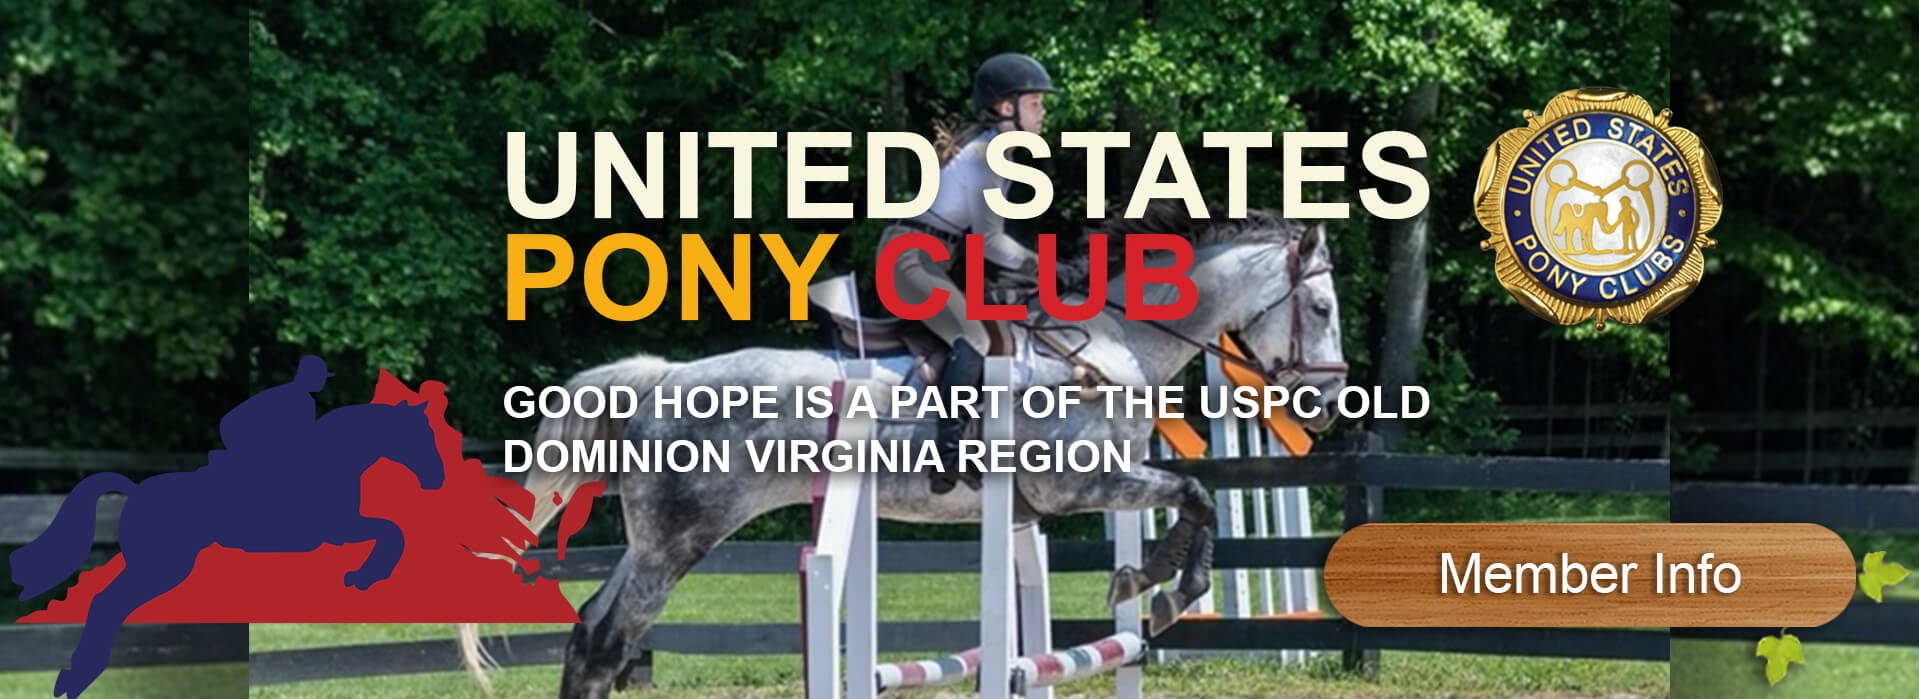 United States Pony Club at GHERF